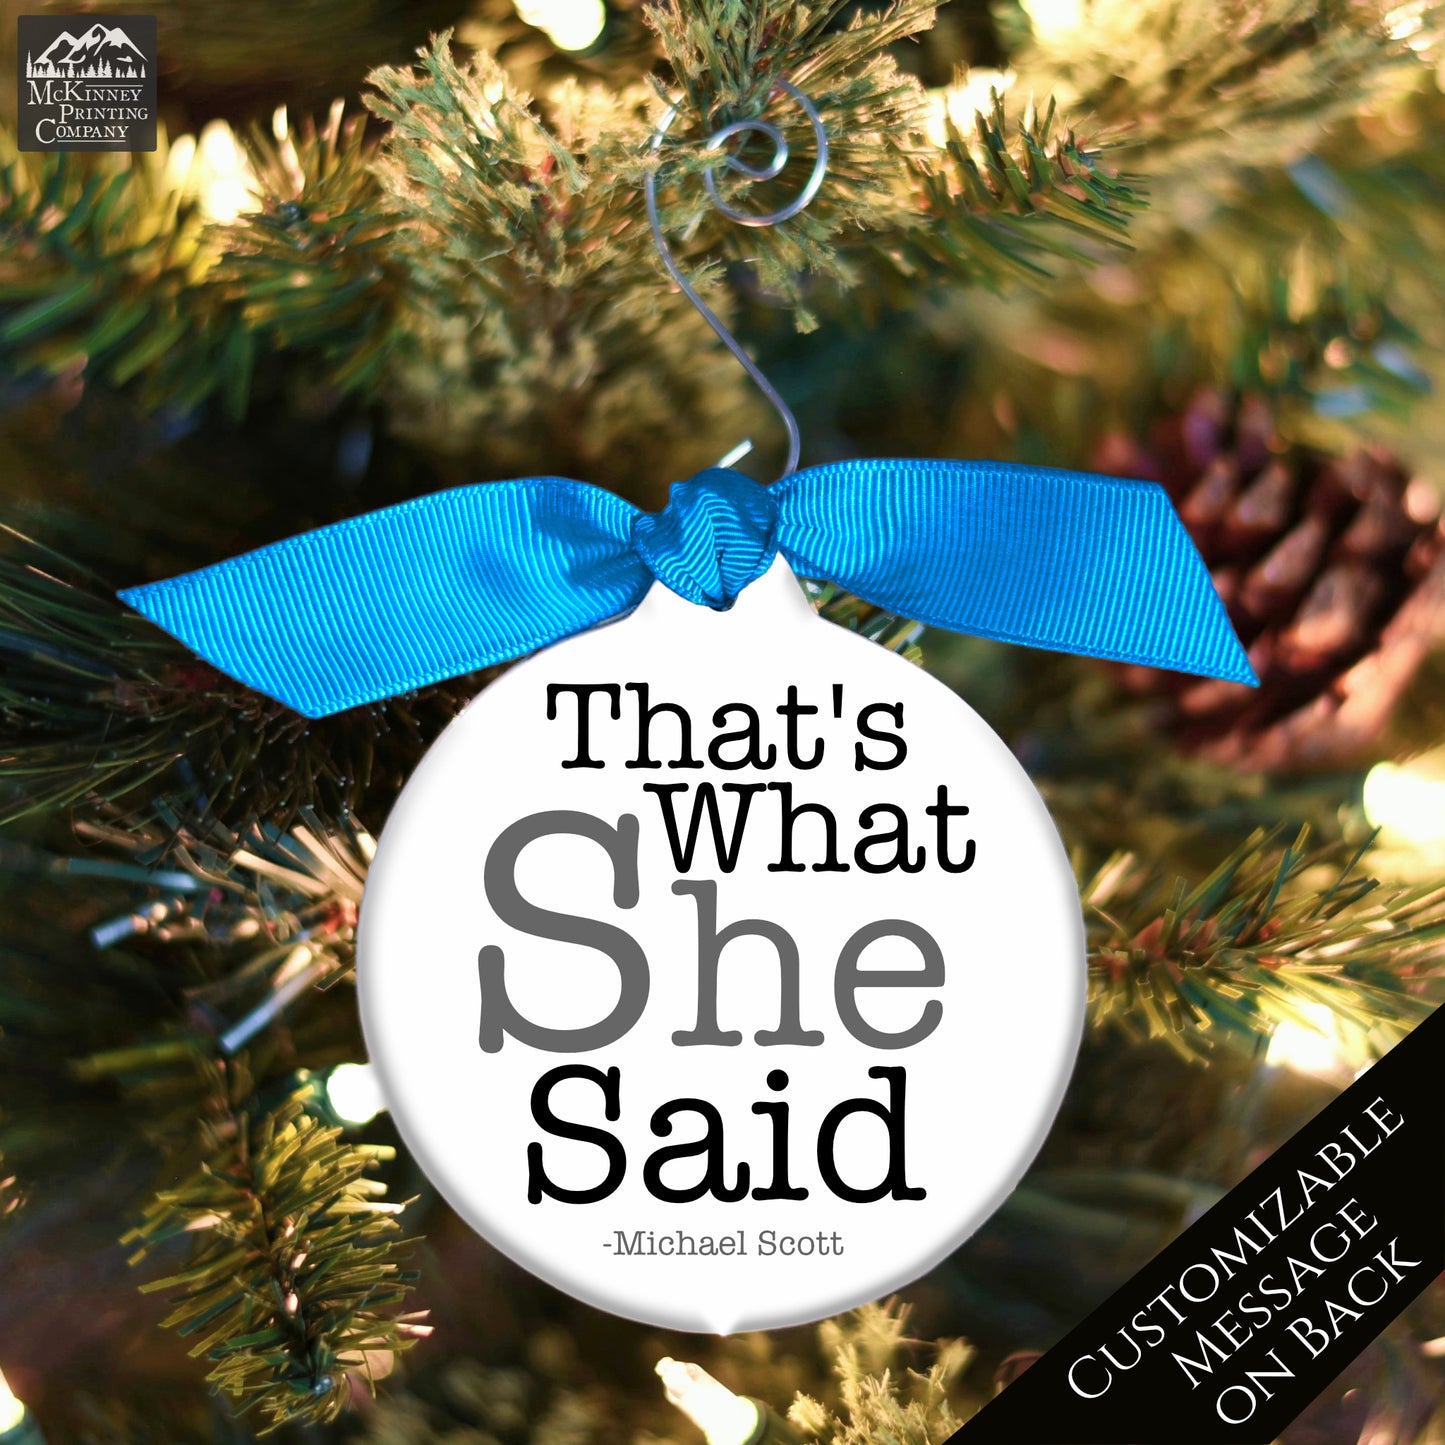 The Office TV Show - Christmas Ornament, That's What She Said, Quote